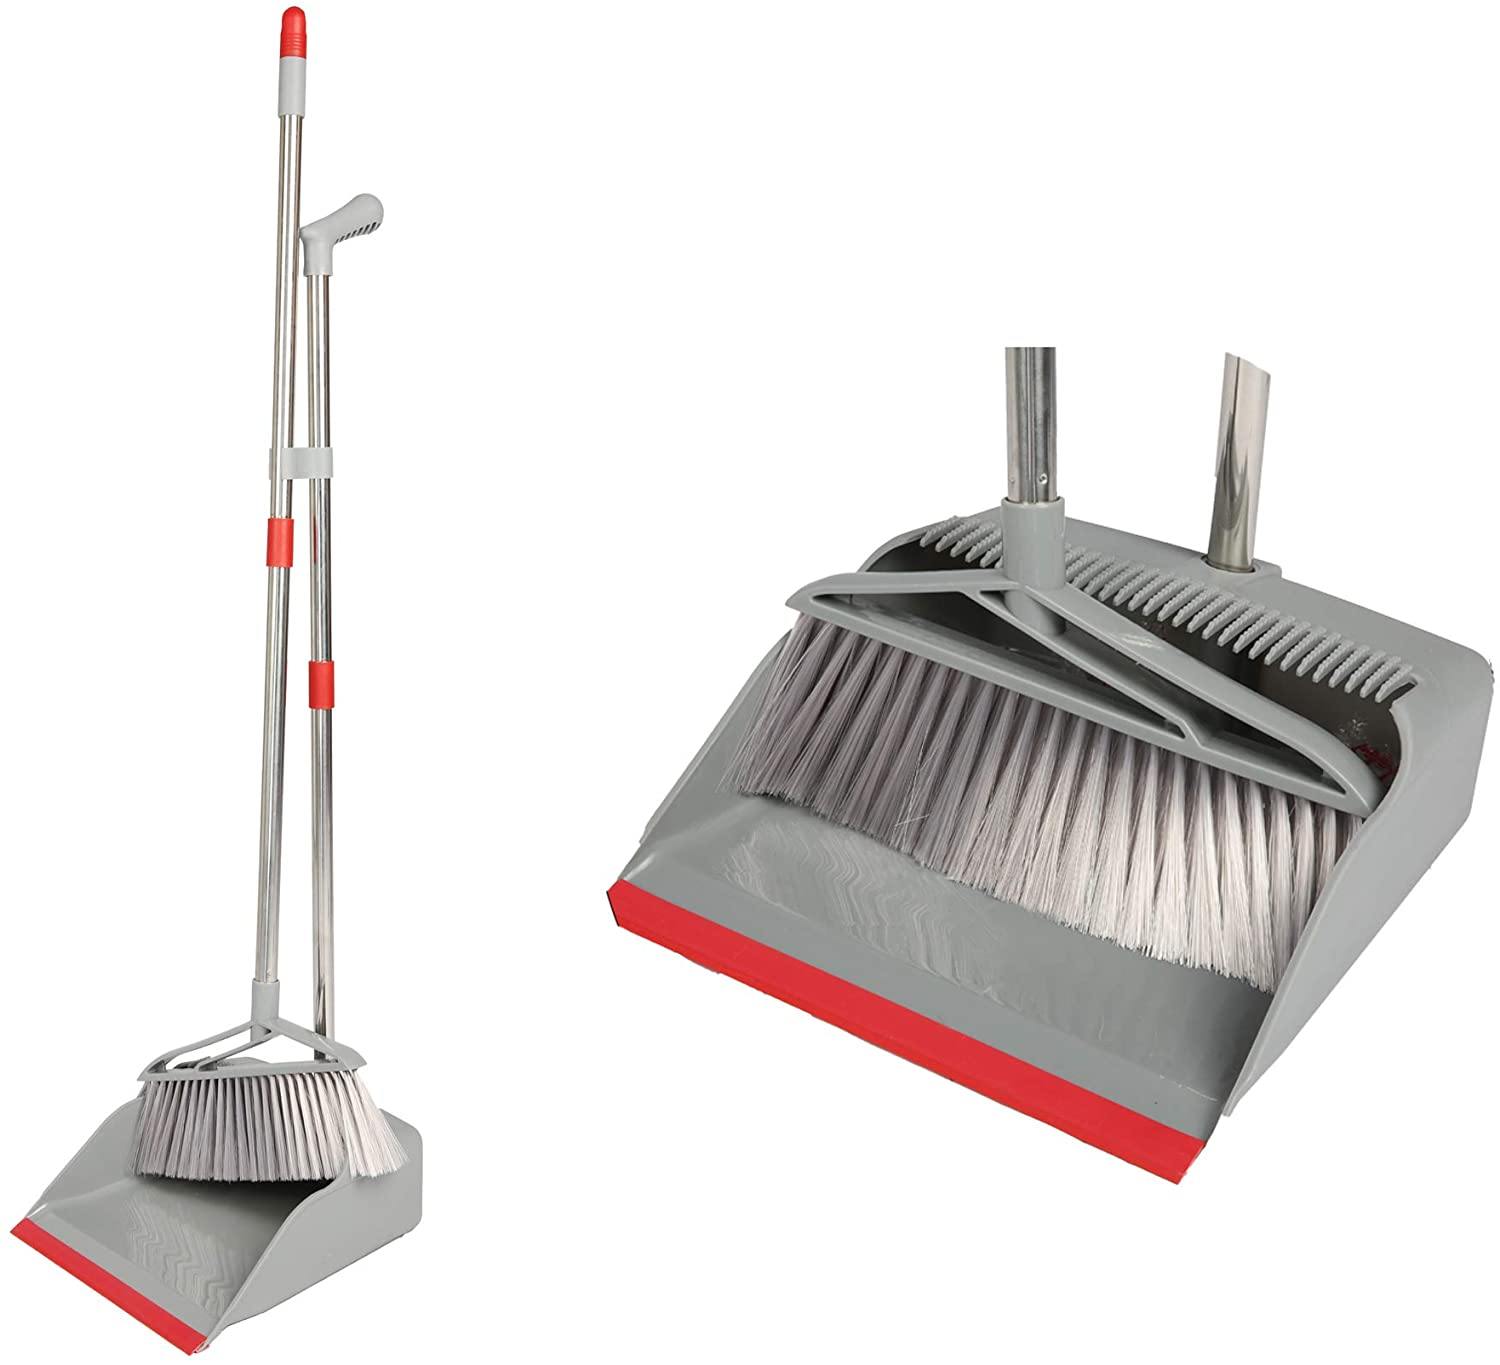 Broom and Dustpan Set Long Handle Lightweight and Robust Sweep Set Easy Assembly for Pet Hair Dirty Corners, Home Office, Grey + Red - Bosonshop